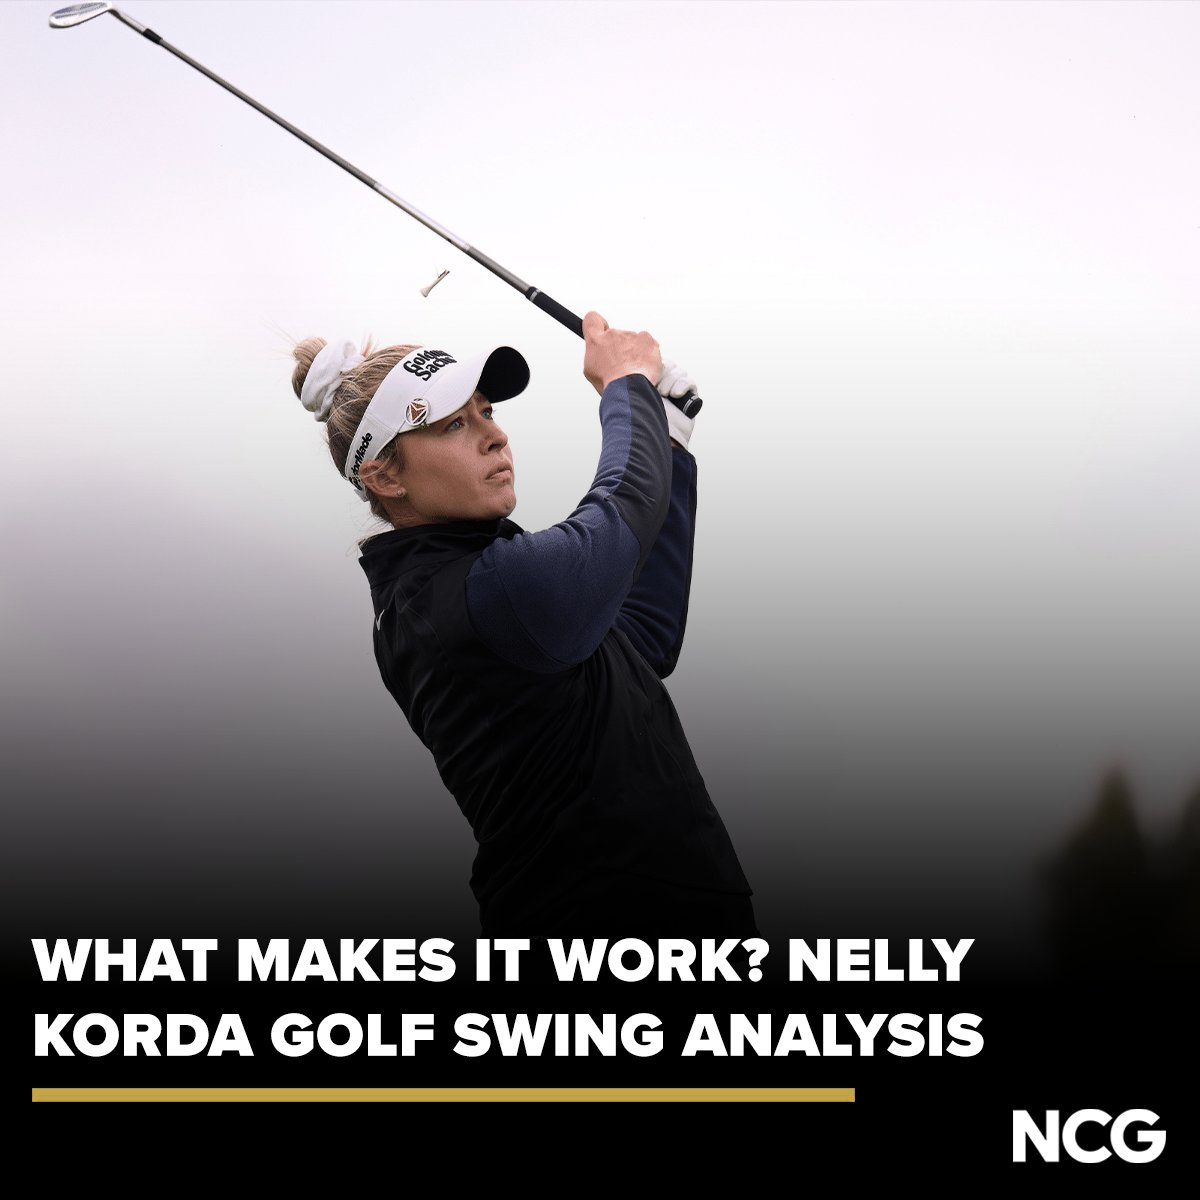 Korda is widely admired for having one of the sweetest-looking swings on any professional golf tour, but what makes it so good? 🏌🏼‍♀️ 🔗 ow.ly/2VYc50RBRYr